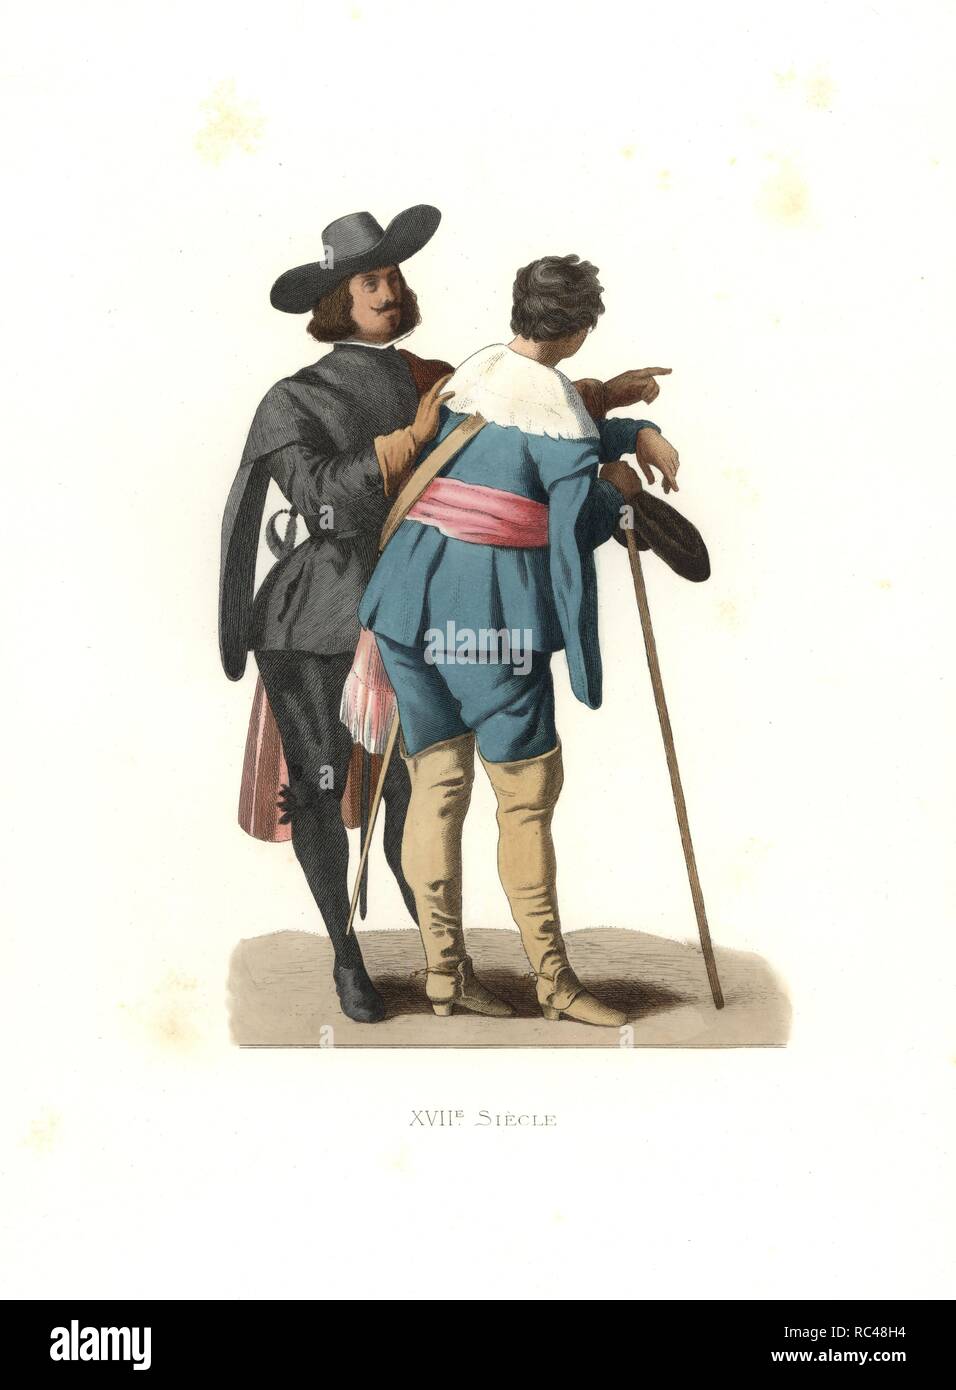 Portrait of two artists, Spain, 17th century, from a painting in the Louvre. The figure in black is traditionally held to be Velasquez. Handcolored illustration by E. Lechevallier-Chevignard, lithographed by A. Didier, L. Flameng, F. Laguillermie, from Georges Duplessis's 'Costumes historiques des XVIe, XVIIe et XVIIIe siecles' (Historical costumes of the 16th, 17th and 18th centuries), Paris 1867. The book was a continuation of the series on the costumes of the 12th to 15th centuries published by Camille Bonnard and Paul Mercuri from 1830. Georges Duplessis (1834-1899) was curator of the Prin Stock Photo